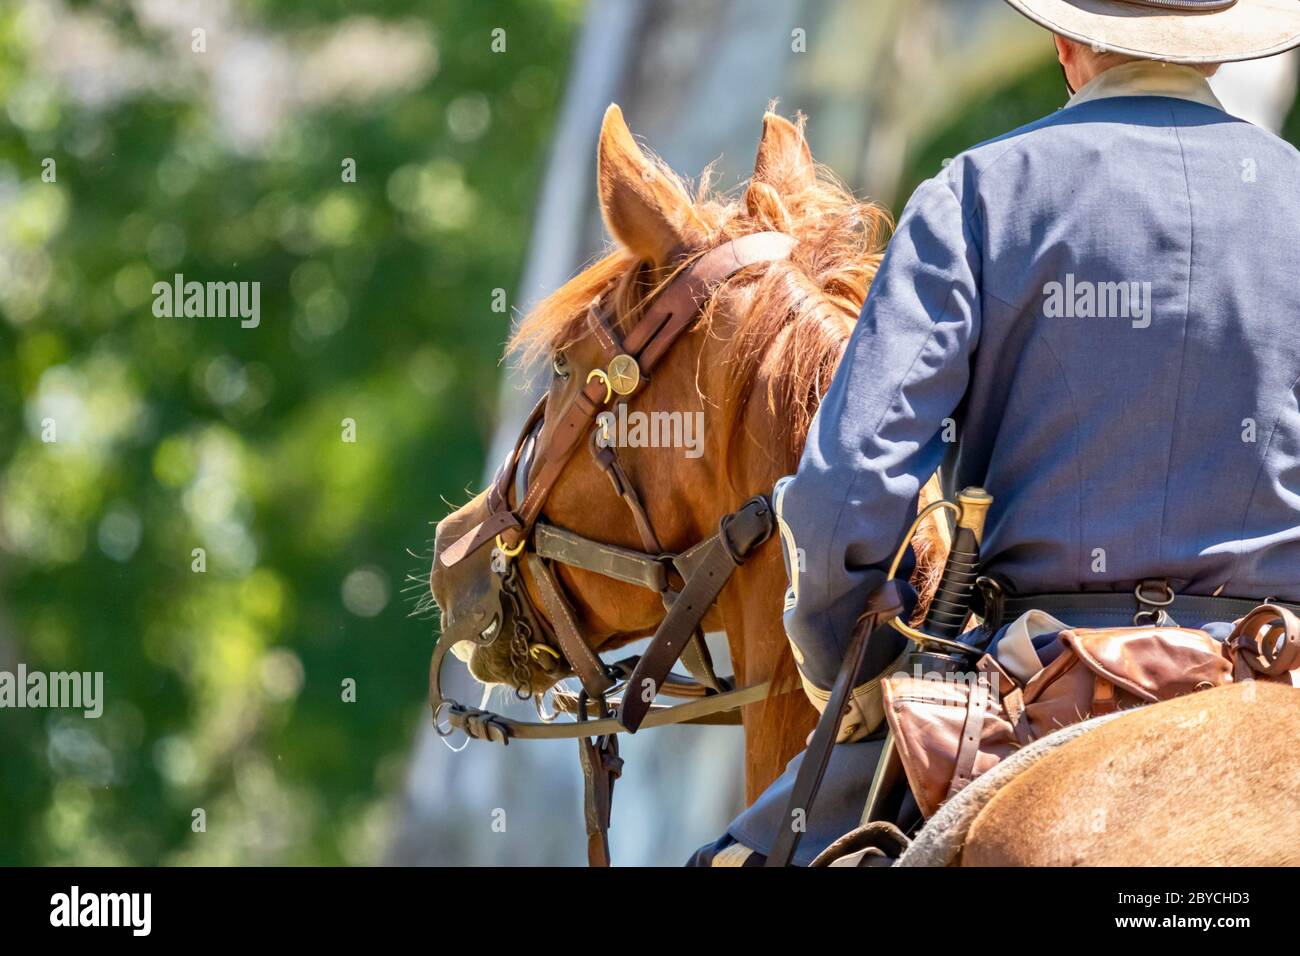 Horse and rider during an American Civil War reenactment Stock Photo